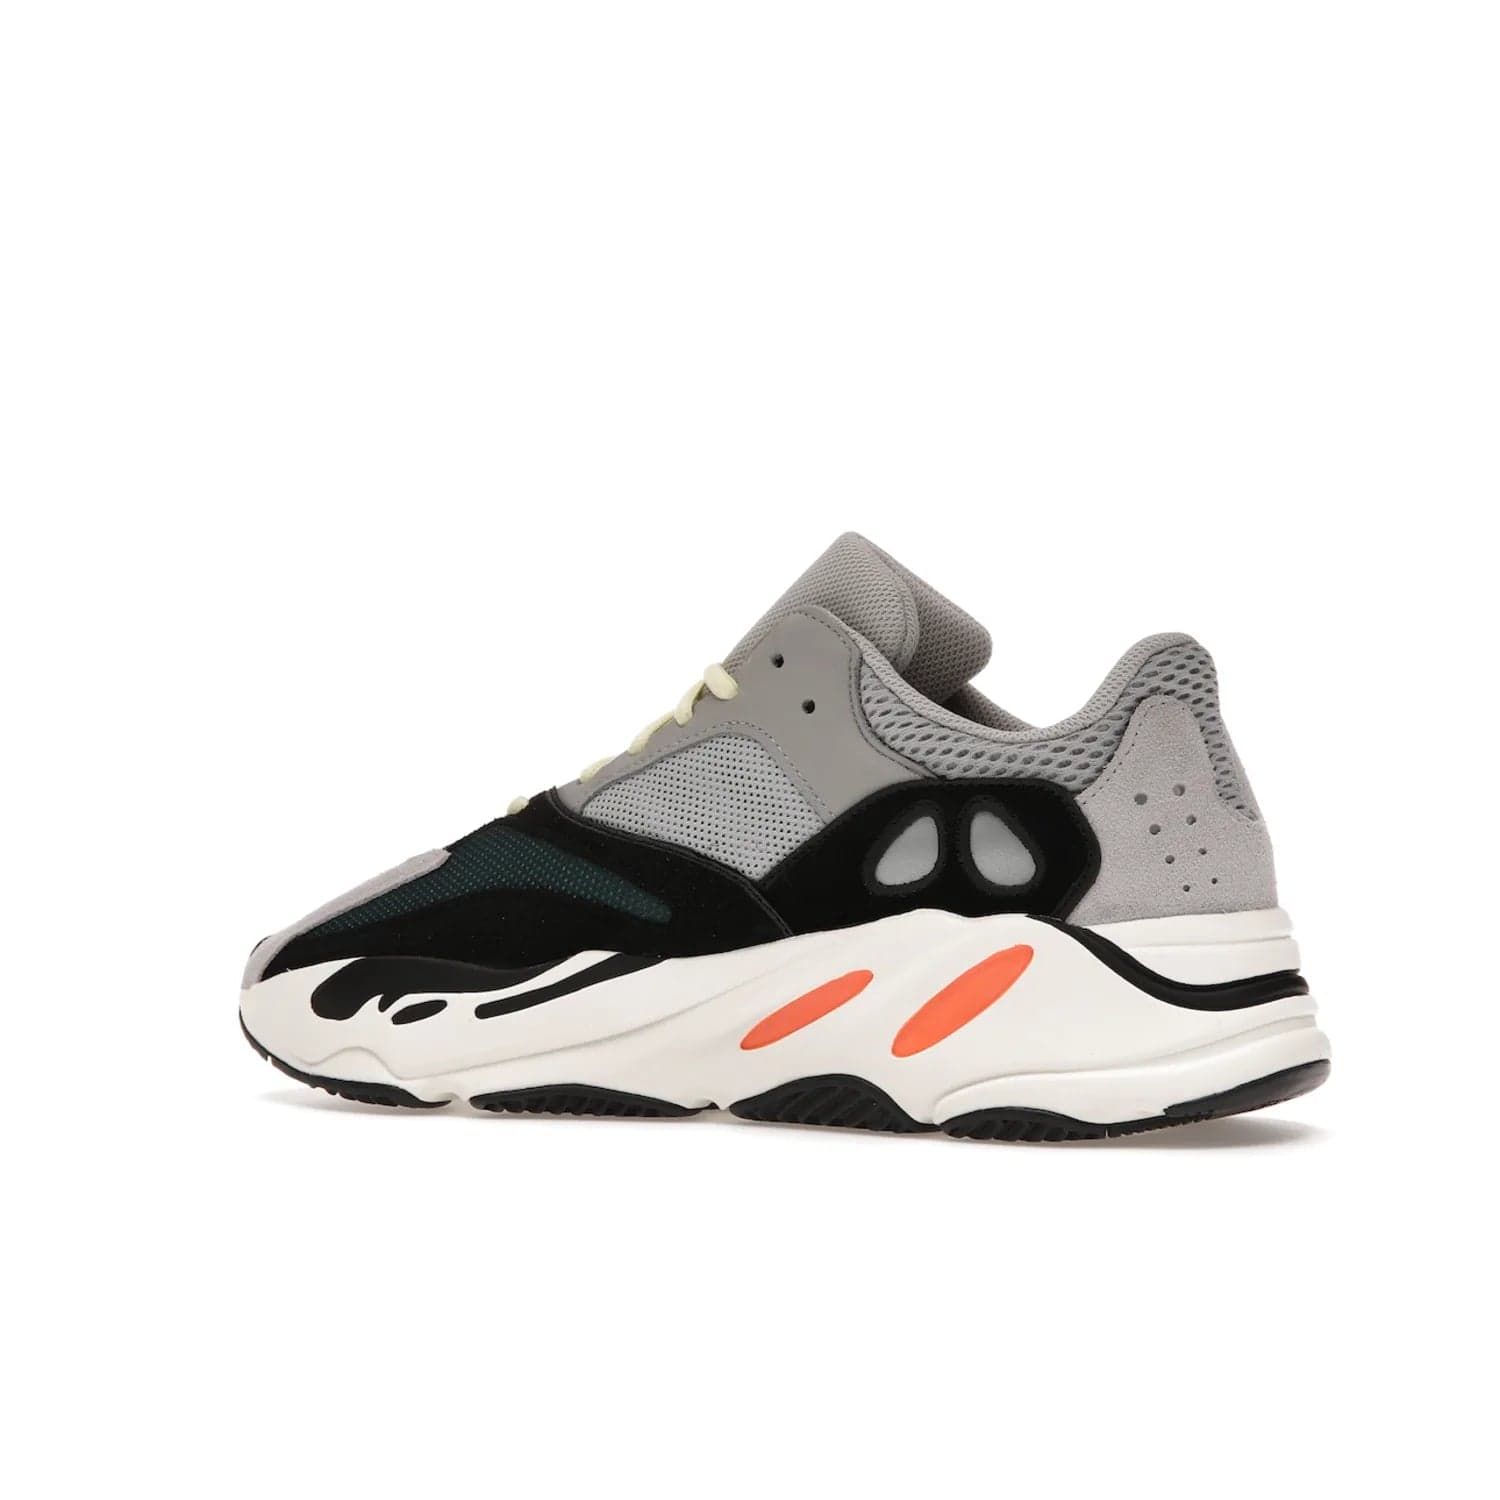 adidas Yeezy Boost 700 Wave Runner - Image 22 - Only at www.BallersClubKickz.com - Shop the iconic adidas Yeezy Boost 700 Wave Runner. Featuring grey mesh and leather upper, black suede overlays, teal mesh underlays, and signature Boost sole. Be bold & make a statement.